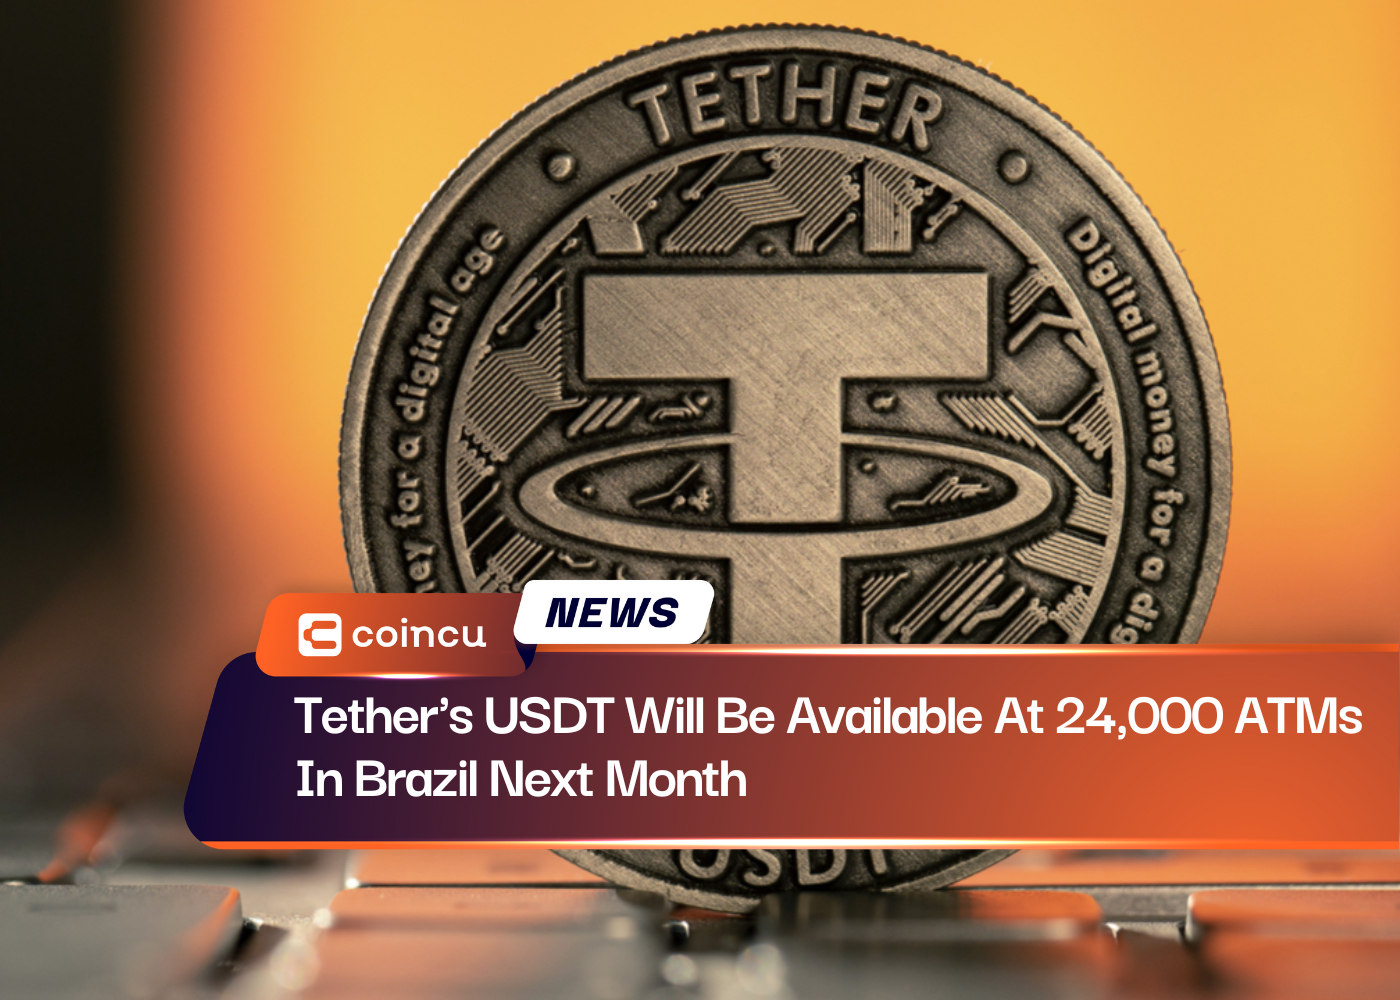 Tether's USDT Will Be Available At 24,000 ATMs In Brazil Next Month